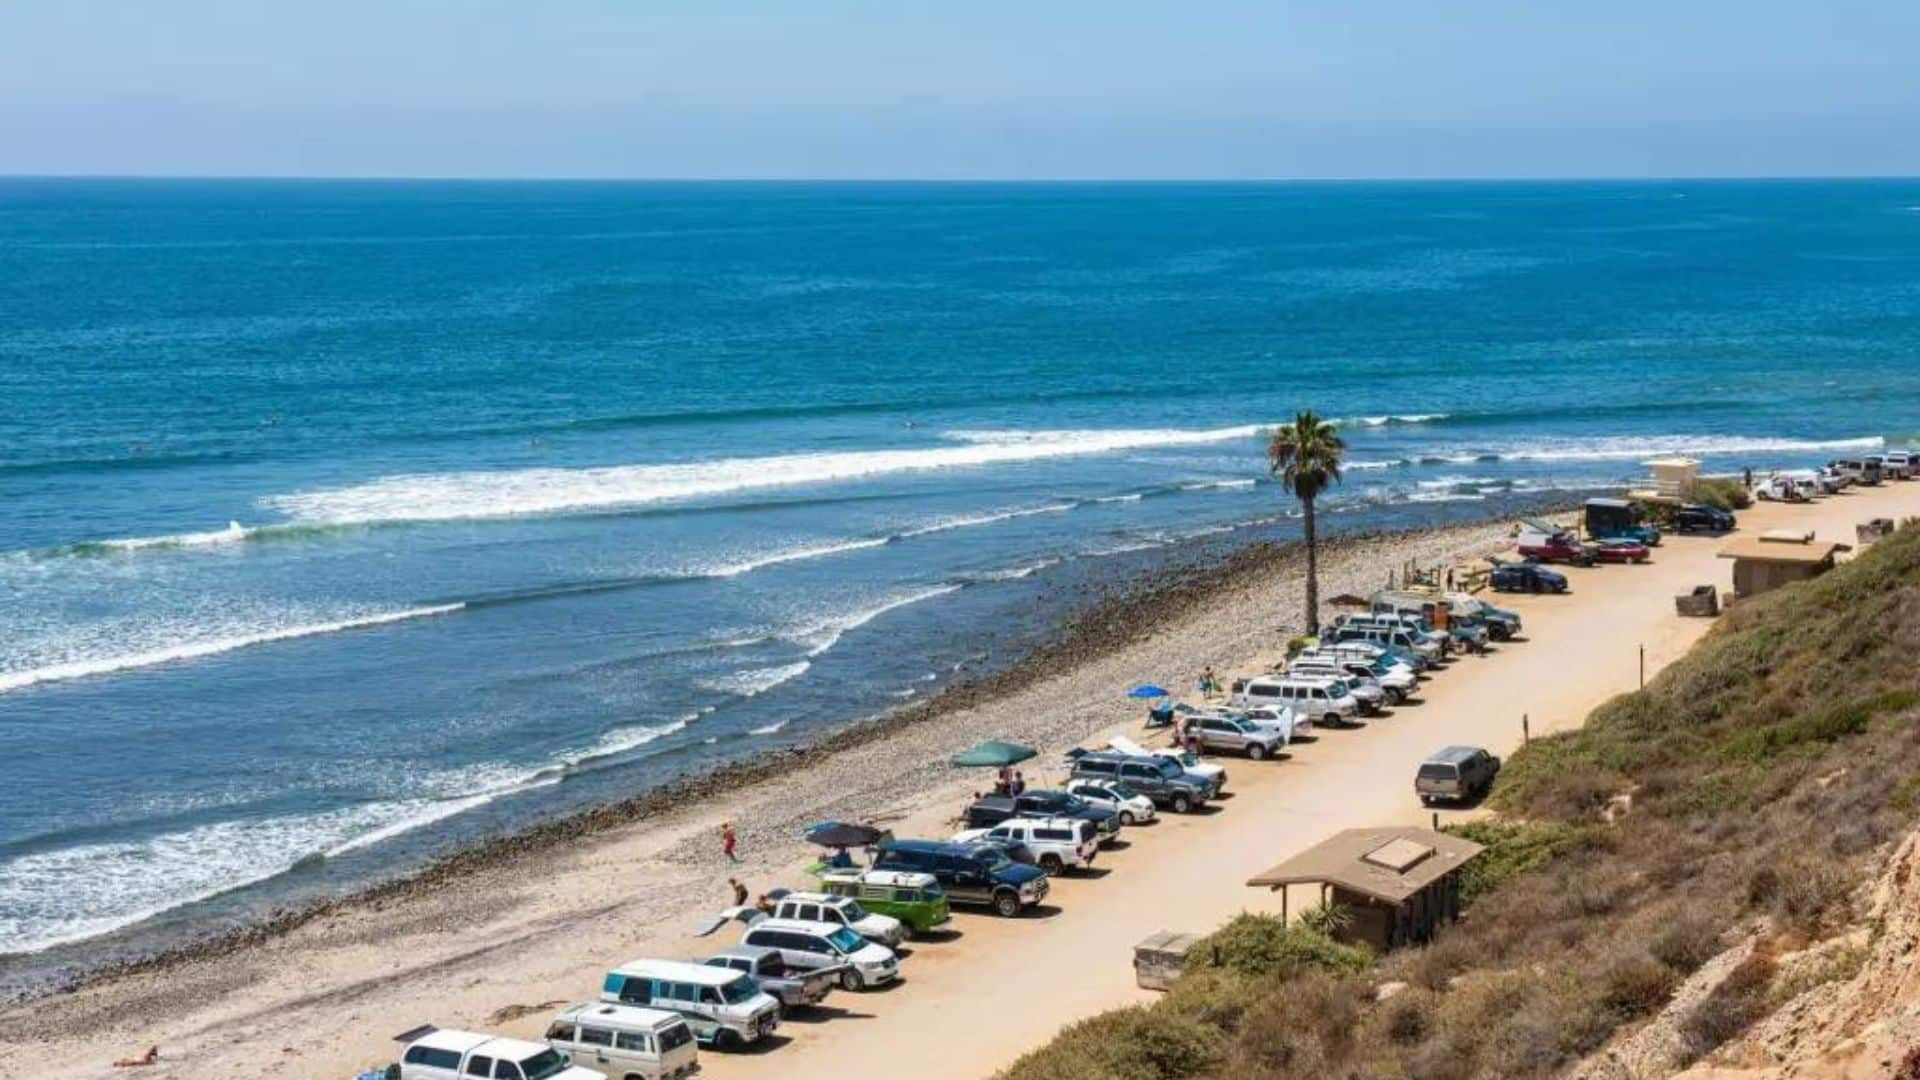 San Onofre State Beach, San Clemente. Cars parked in row near the beach